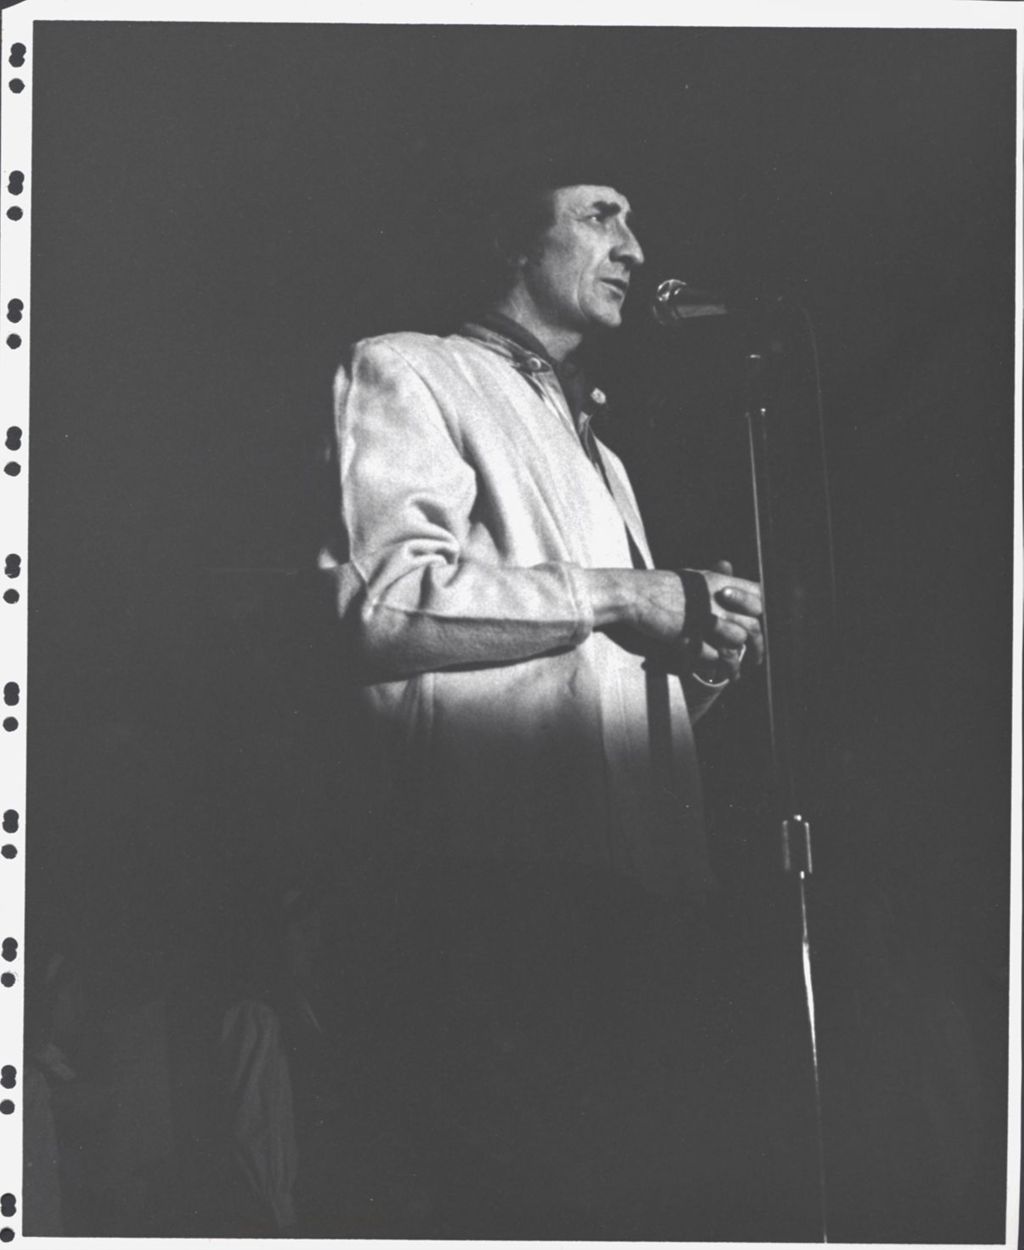 Entertainer at a microphone